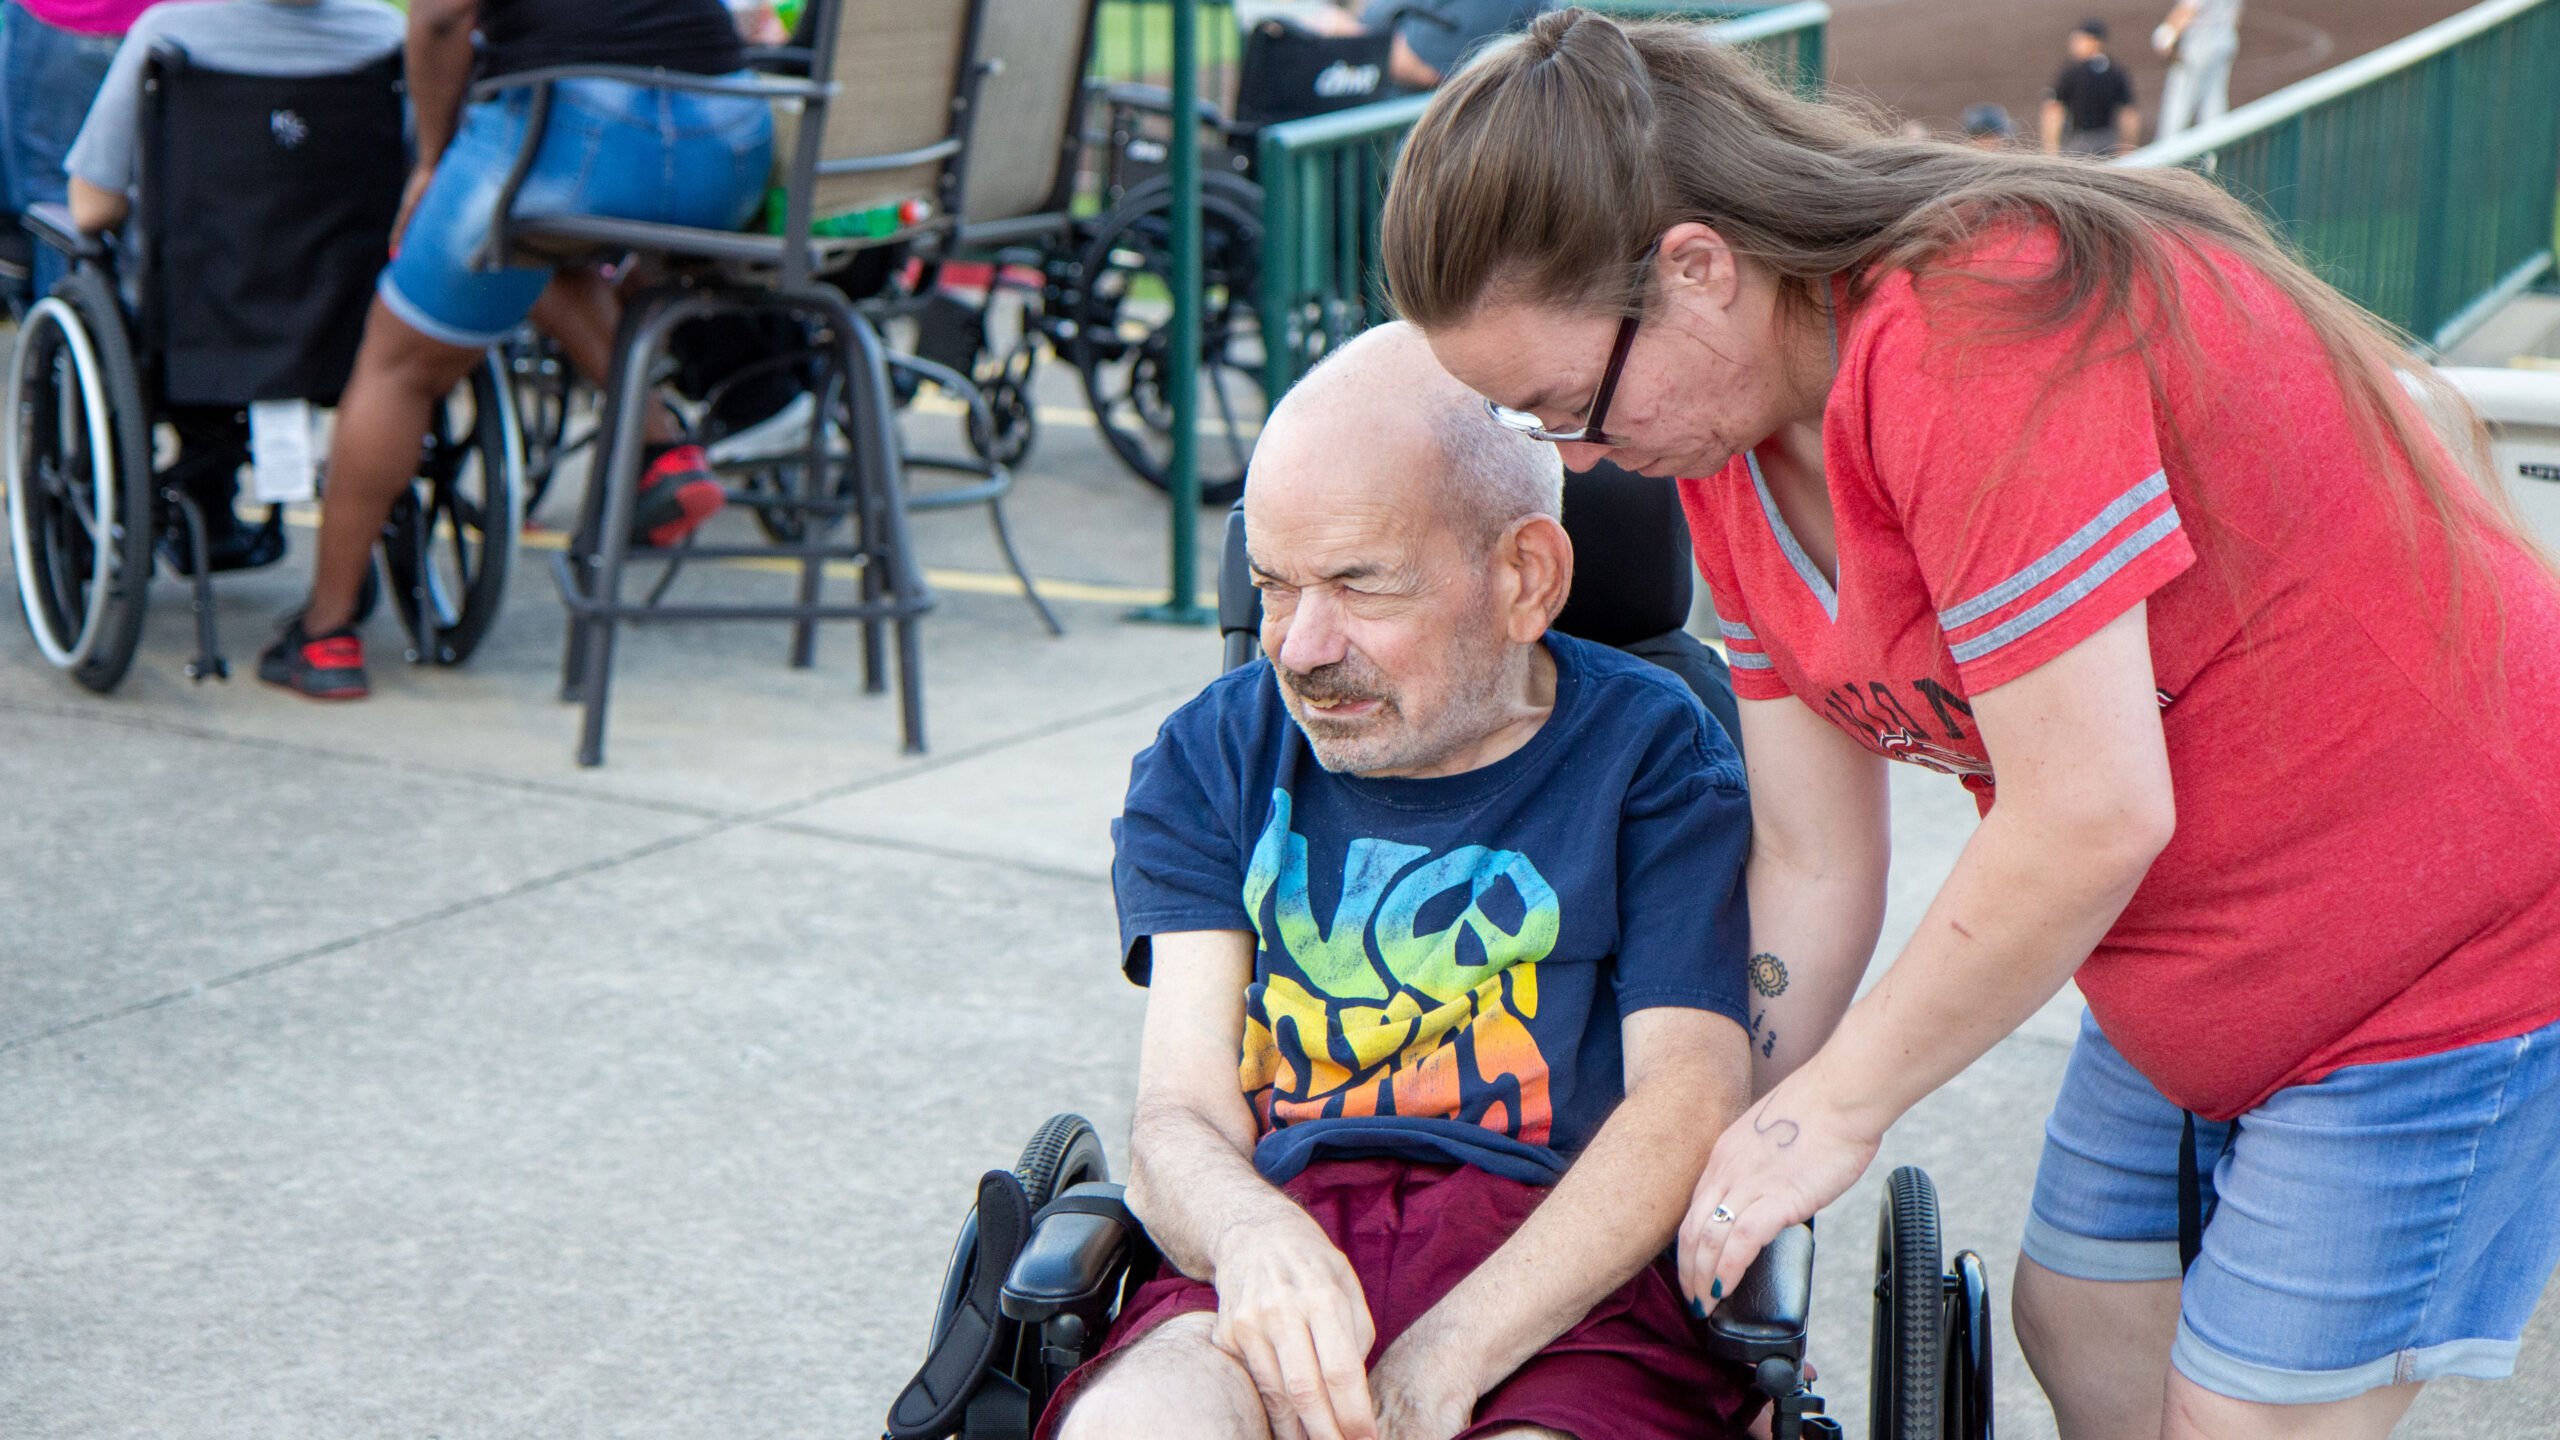  A woman in a red shirt leaning over to talk to an older man in a wheelchair. The man is wearing a colorful t-shirt and red shorts. Other people in wheelchairs and chairs are visible in the background.